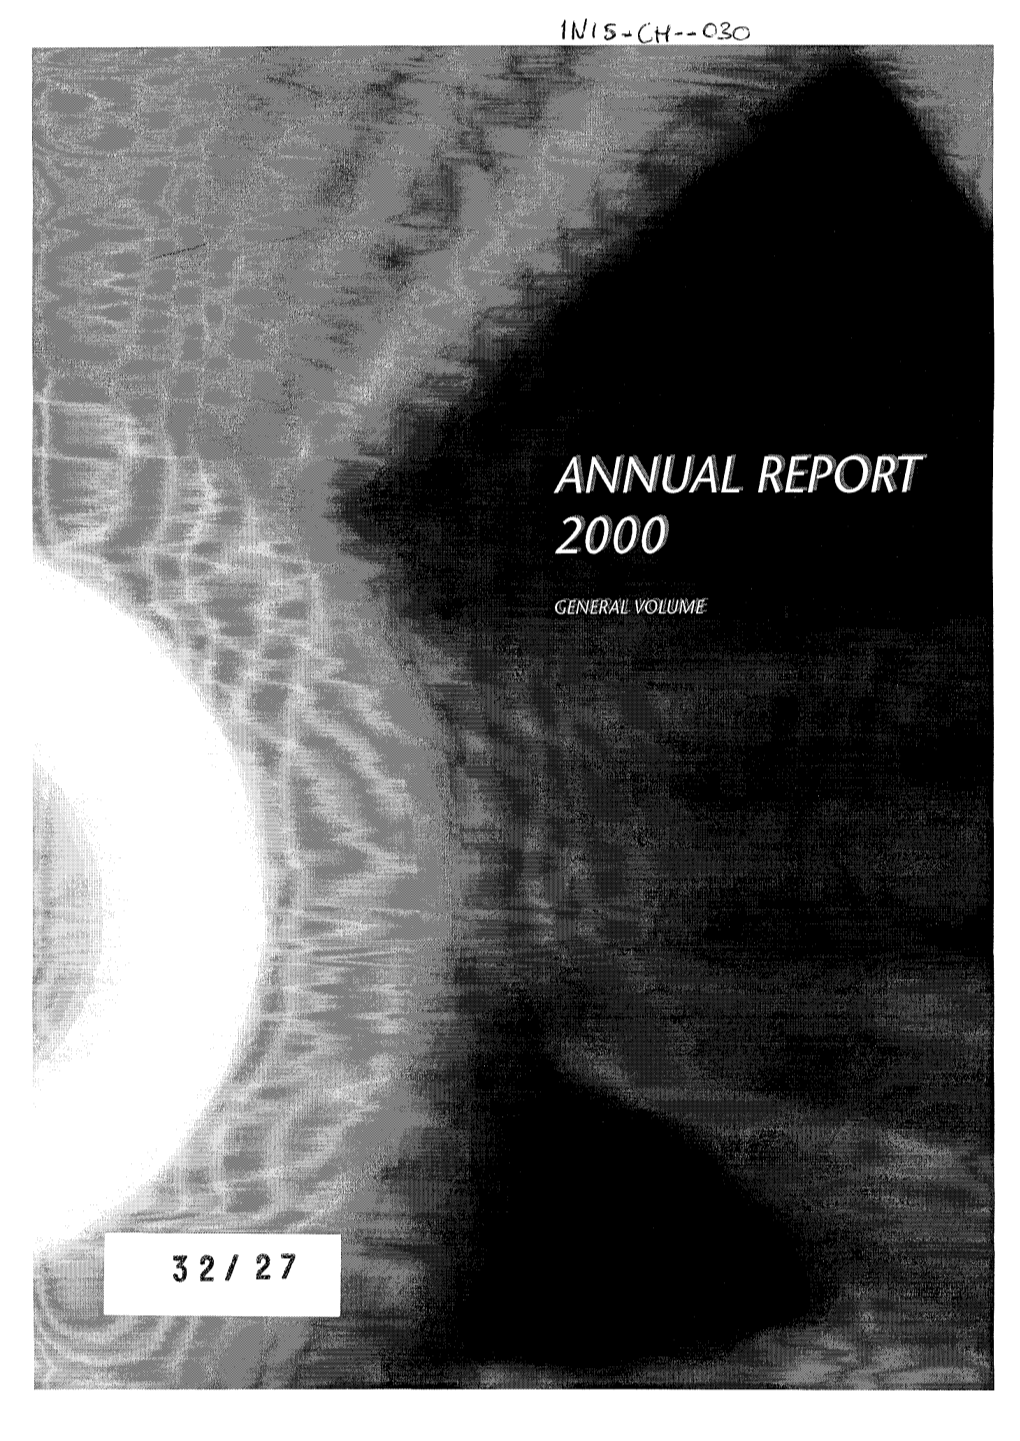 J-F- •.-'. 32/ 2? PLEASE BE AWARE THAT ALL of the MISSING PAGES in THIS DOCUMENT WERE ORIGINALLY BLANK PSI ANNUAL REPORT 2000 IMPRESSUM